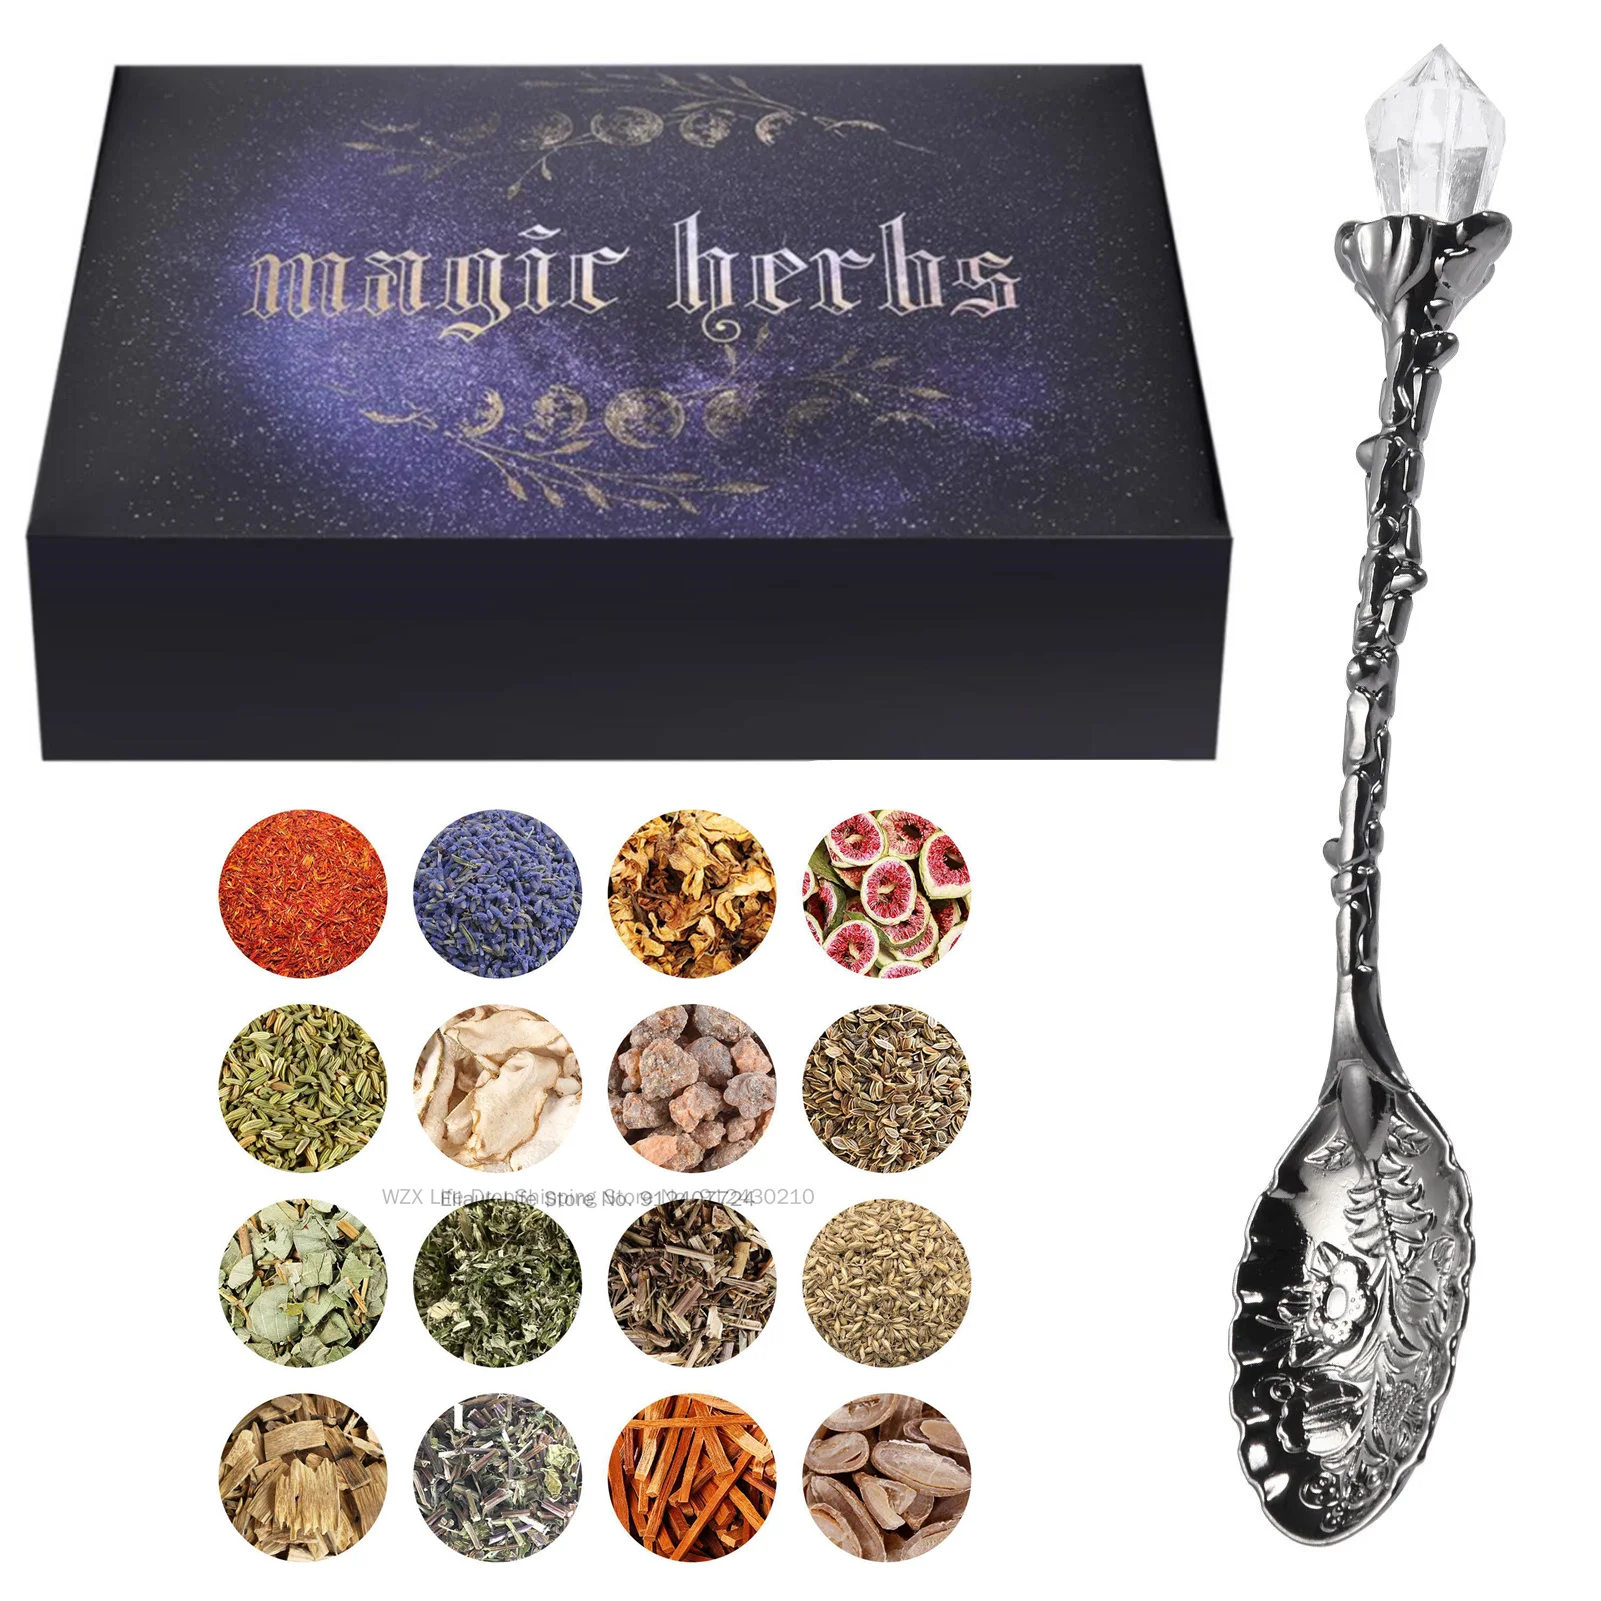 

Antique 30 Herbs Witchcraft Kit Dried Herb Kit with Crystal Spoon Magic Witch Toolkit Dried Flower Witchcraft Supplies Christmas